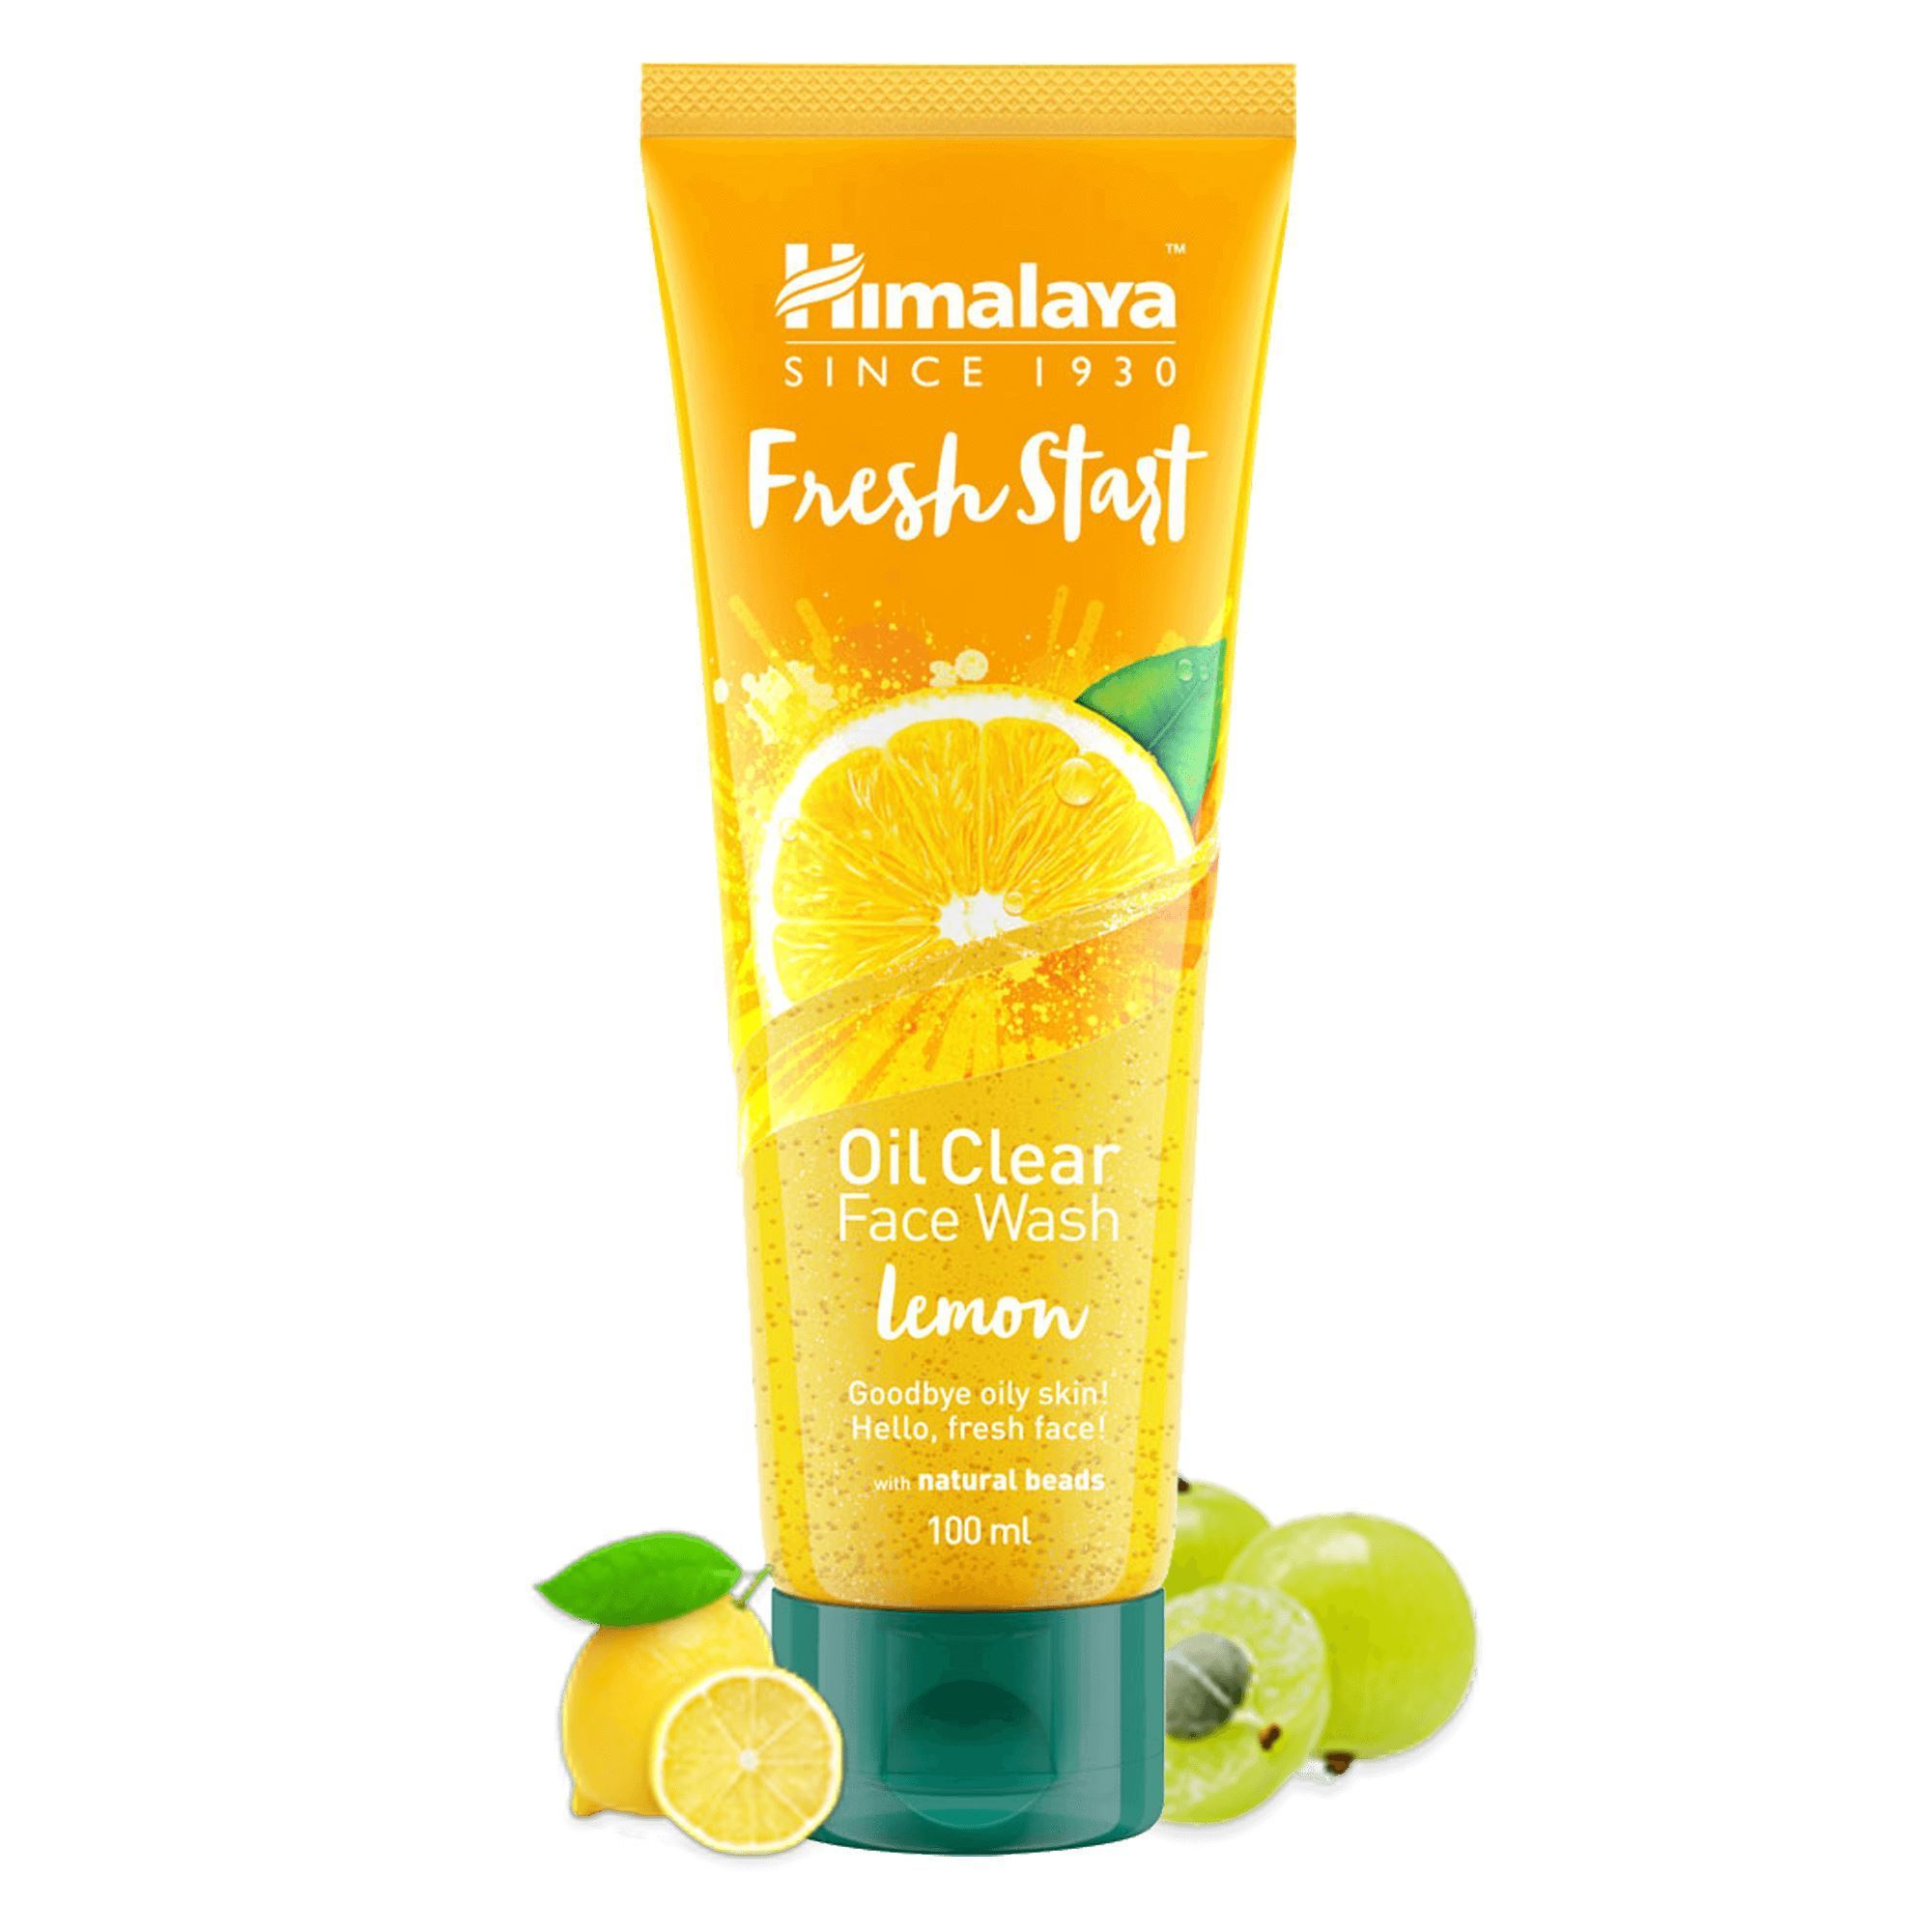 Himalaya Fresh Start Oil Clear Lemon Face Wash - Helps remove excess oil, dirt, and impurities